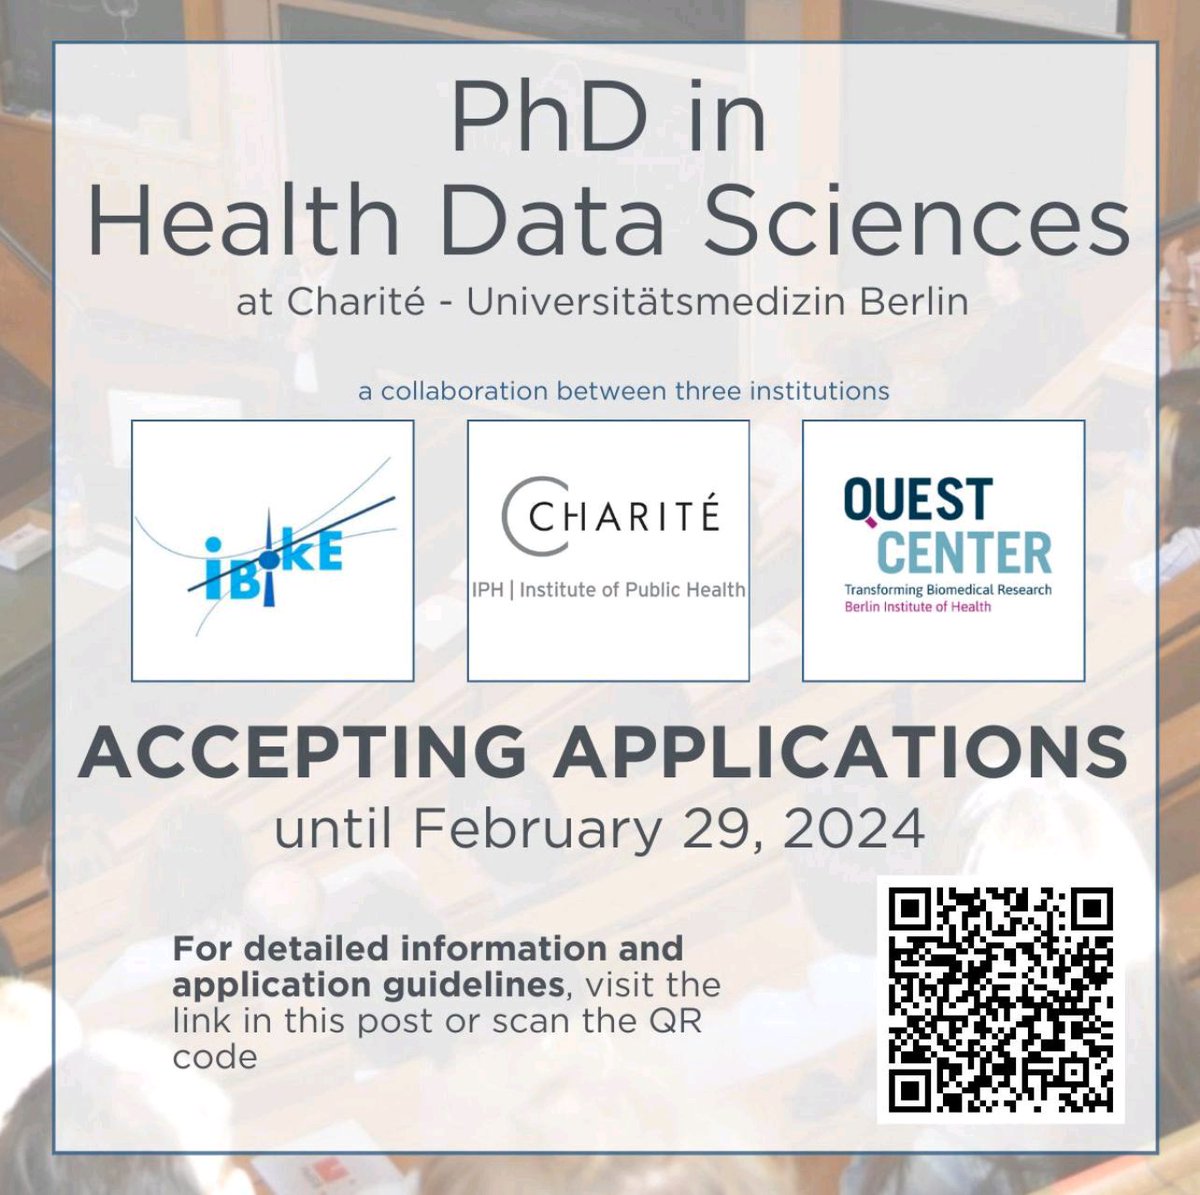 Structured PhD Program in Health Data Sciences (HDS) at Charité - Universitätsmedizin Berlin. Apply: lnkd.in/gm5iqDau 🌐 International Students: Scholarships are available through the German Academic Exchange Service (DAAD) Details: lnkd.in/eSkBZJX8